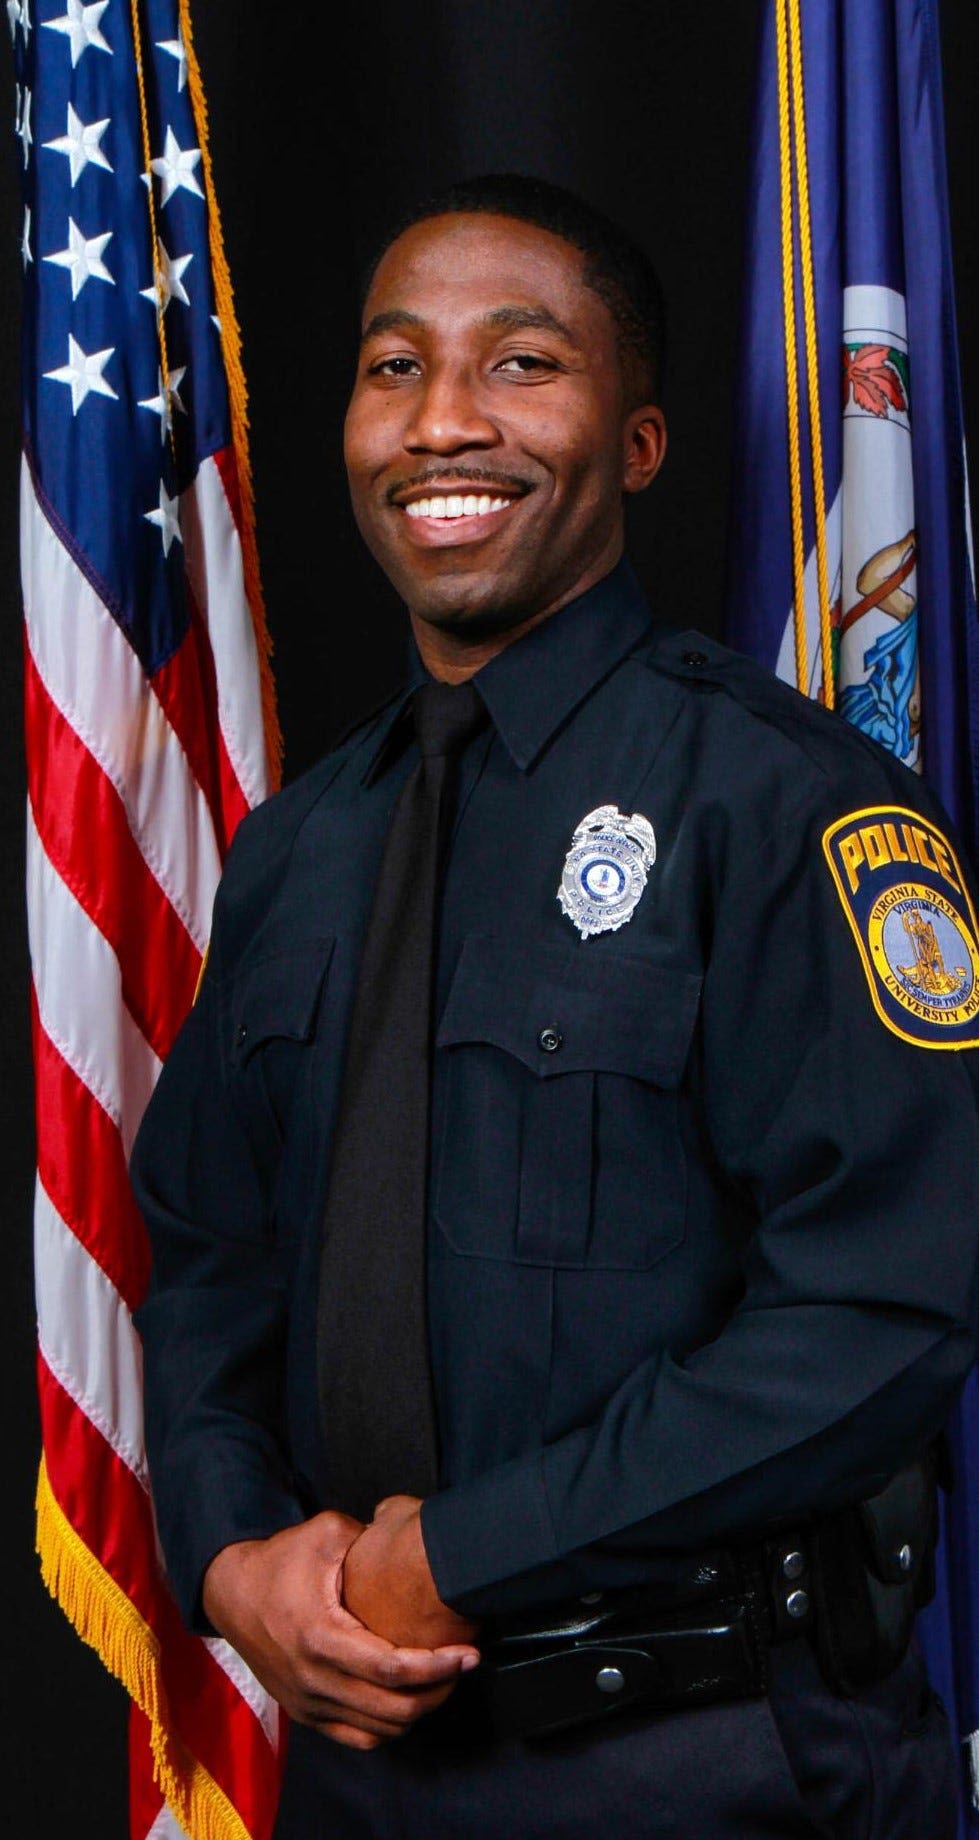 VSU gives honorary degree to first-ever campus police officer shot in the line of duty